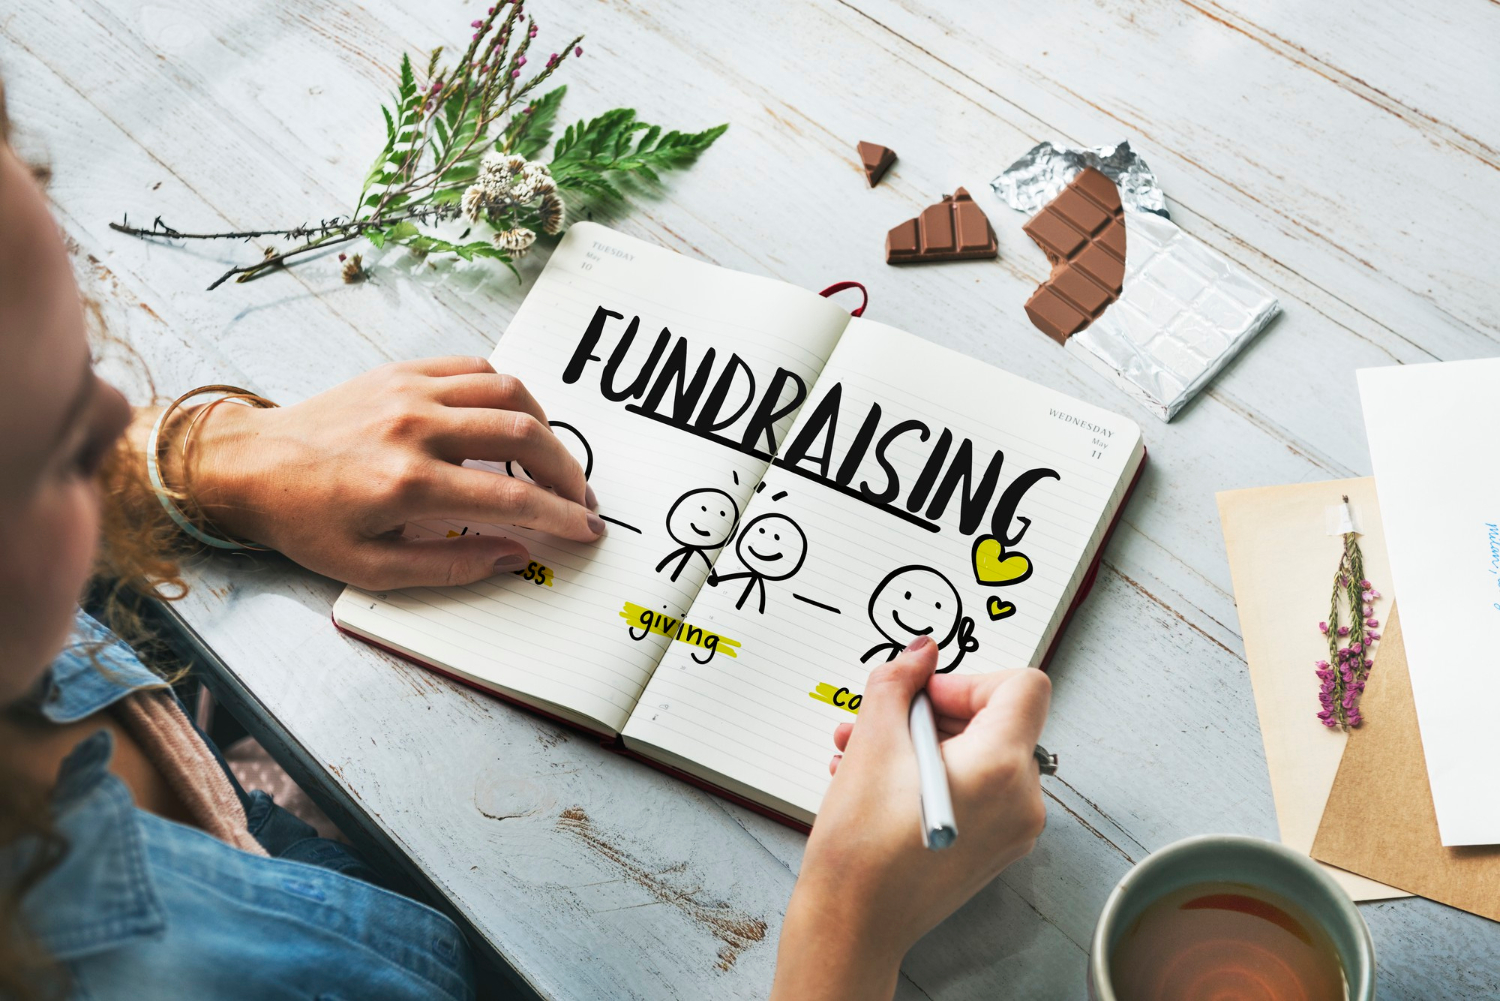 How to Run Your First Fundraiser